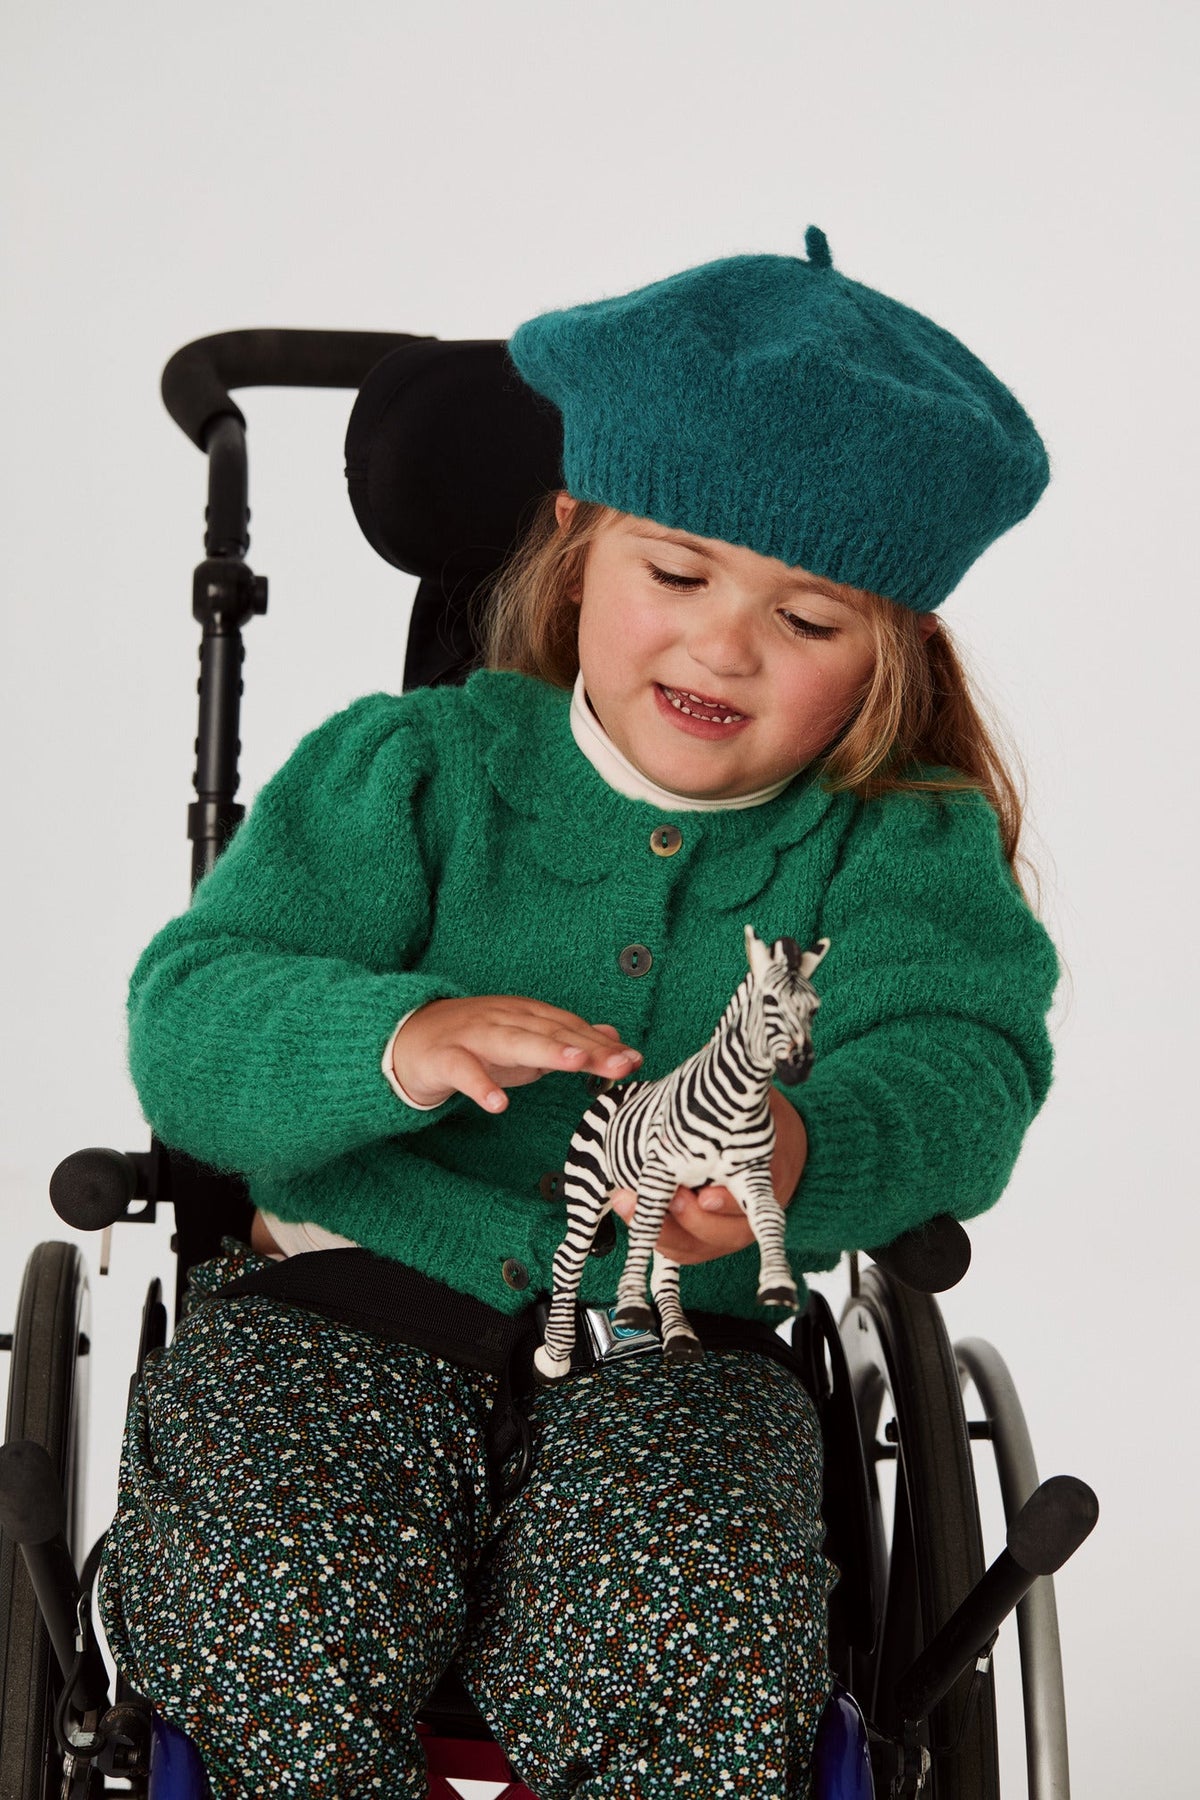 Boucle Flower Ellie Cardigan - Emerald+Model is 42 inches tall, 57lbs, wearing a size 6-7y